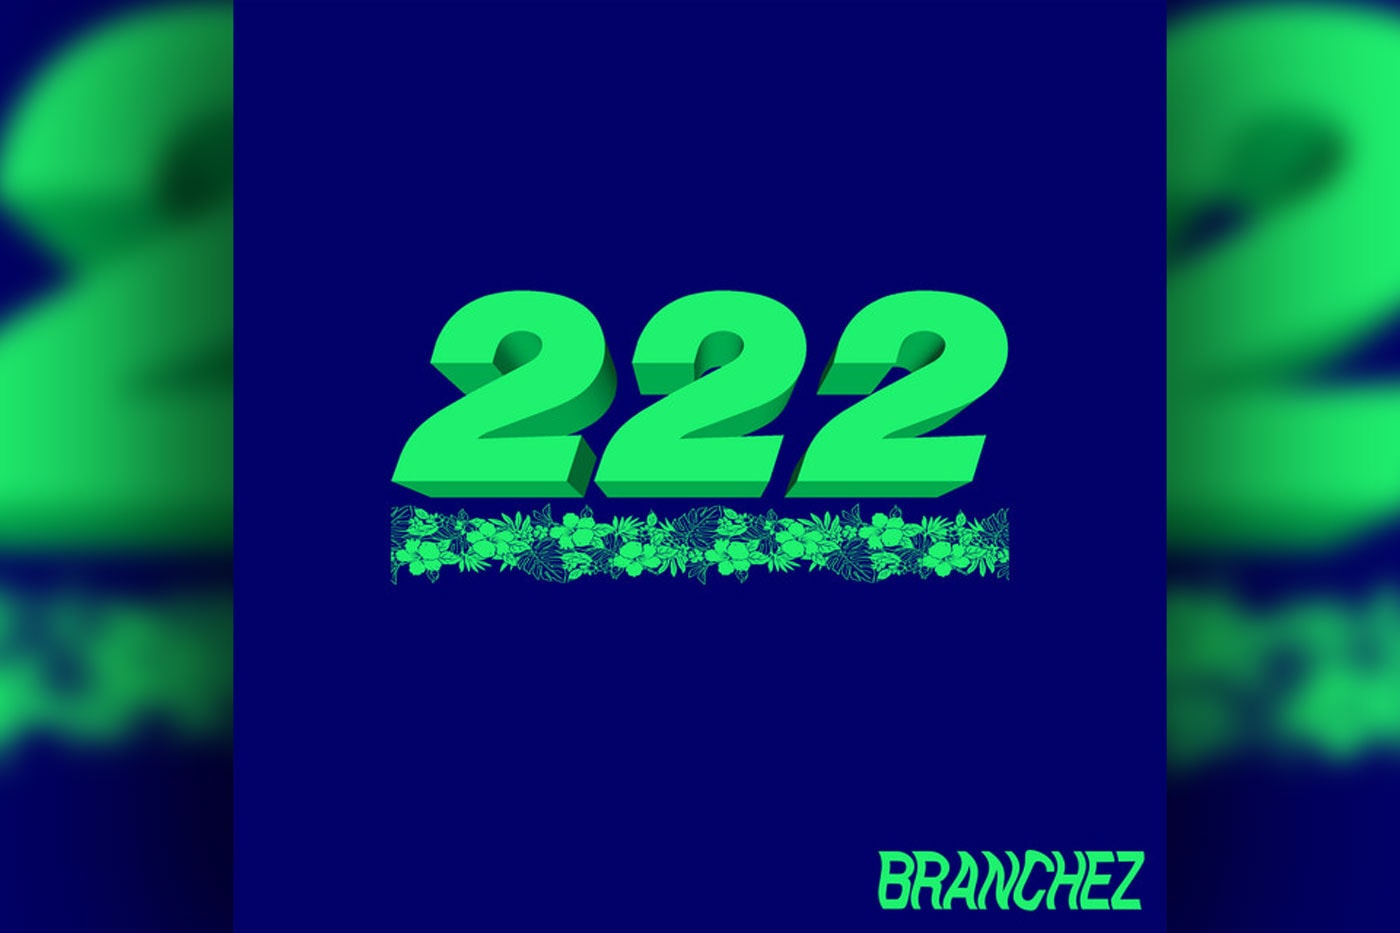 Watch Branchez's Throwback Video For "Dreamer" Featuring Santell